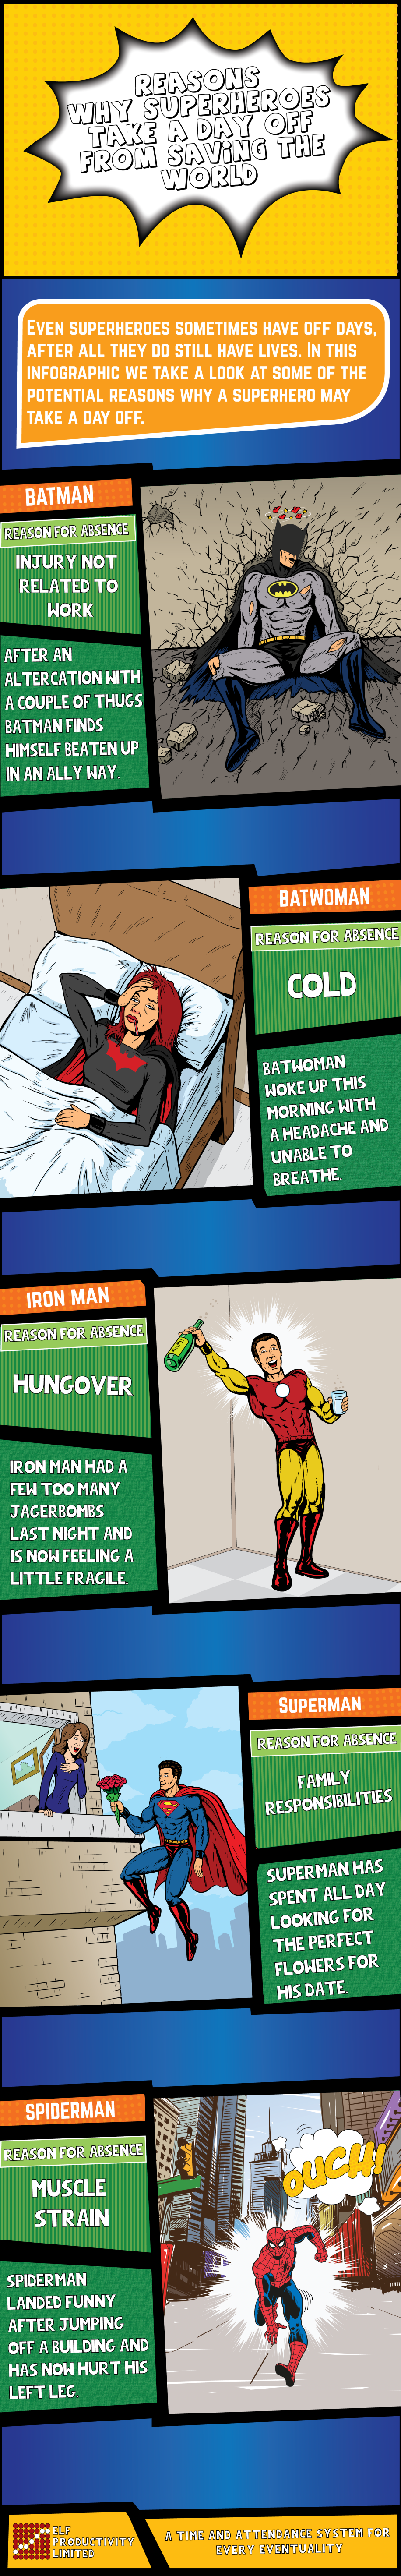 Reasons Why Superheroes Take A Day Off by Elf Productivity